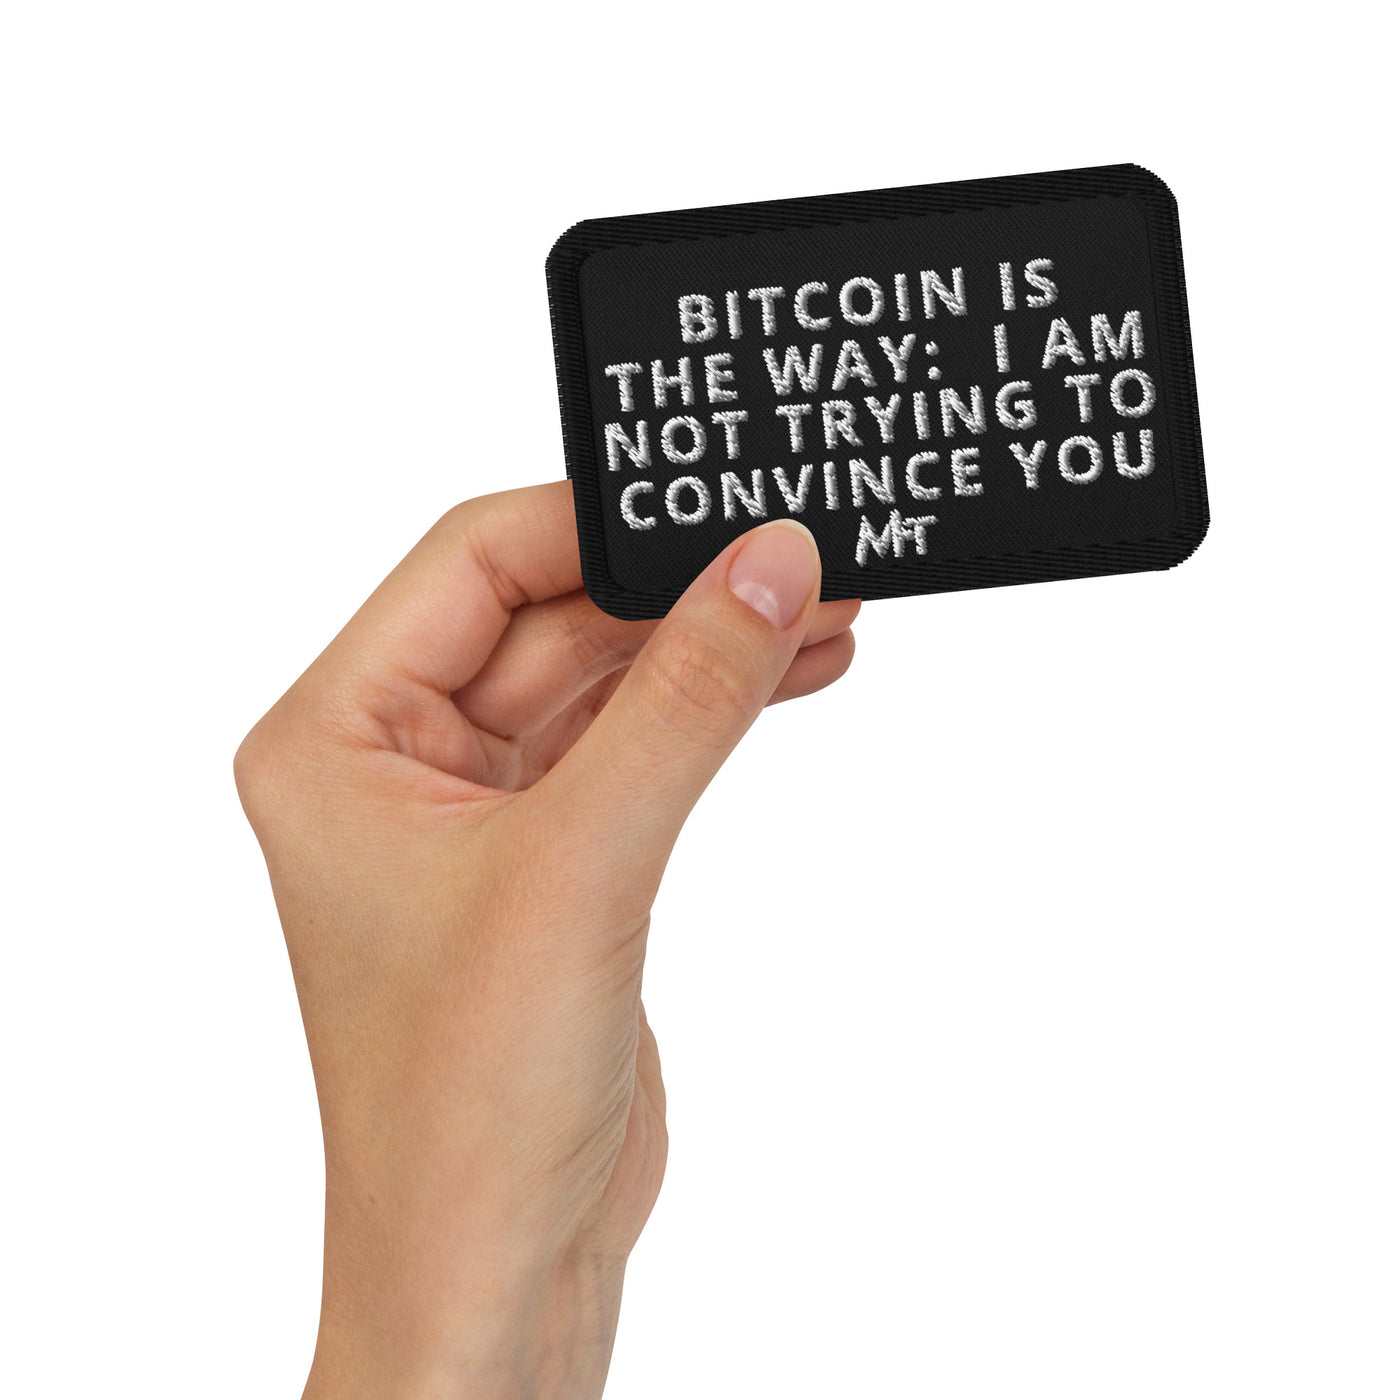 Bitcoin is the Way - Embroidered patches